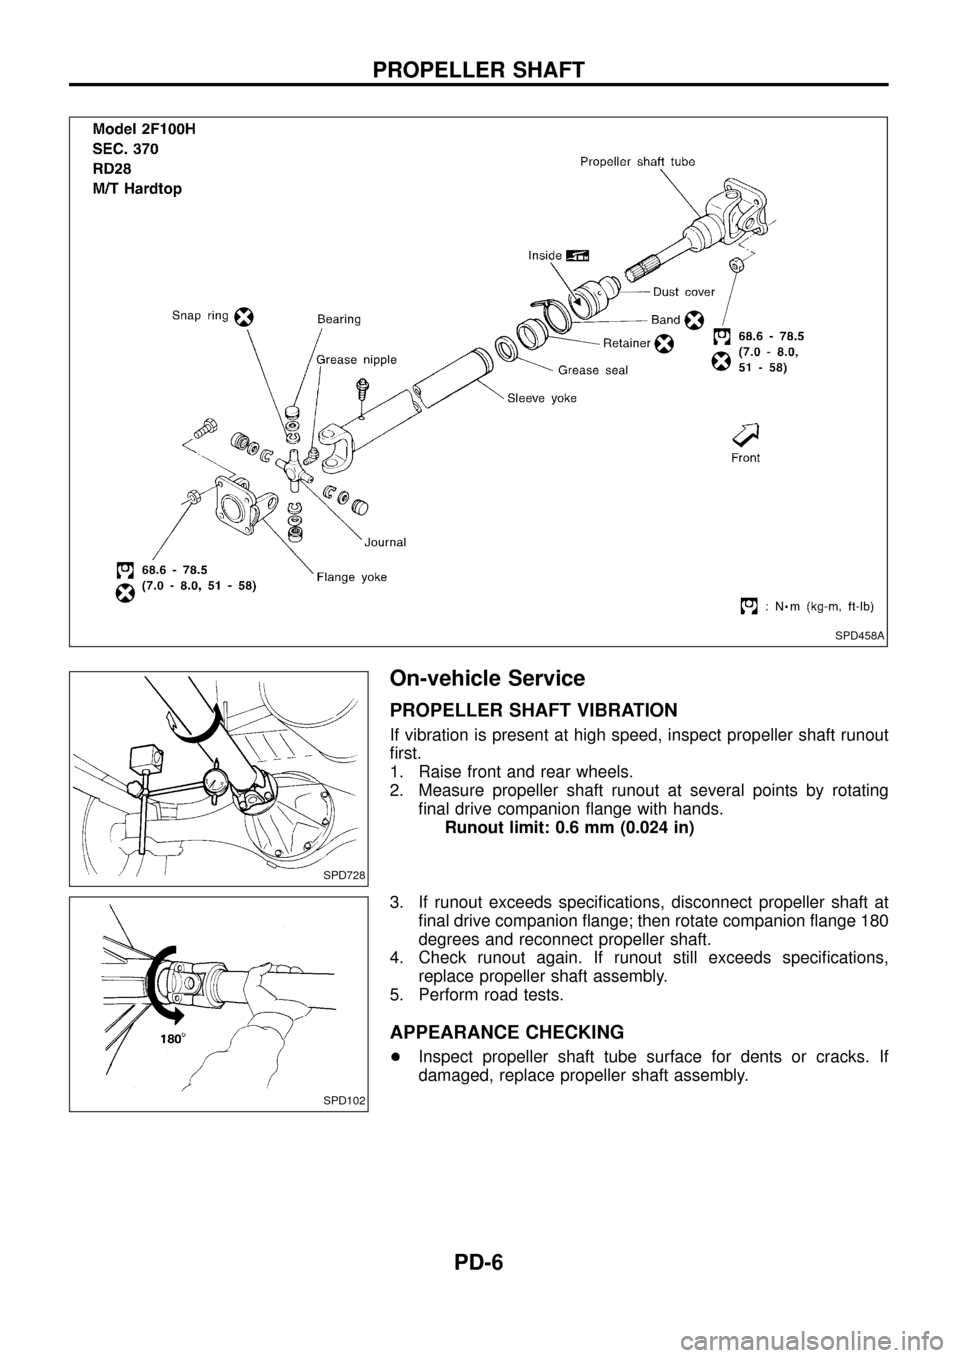 NISSAN PATROL 1998 Y61 / 5.G Propeller Shaft And Differential Carrier Workshop Manual On-vehicle Service
PROPELLER SHAFT VIBRATION
If vibration is present at high speed, inspect propeller shaft runout
®rst.
1. Raise front and rear wheels.
2. Measure propeller shaft runout at several p